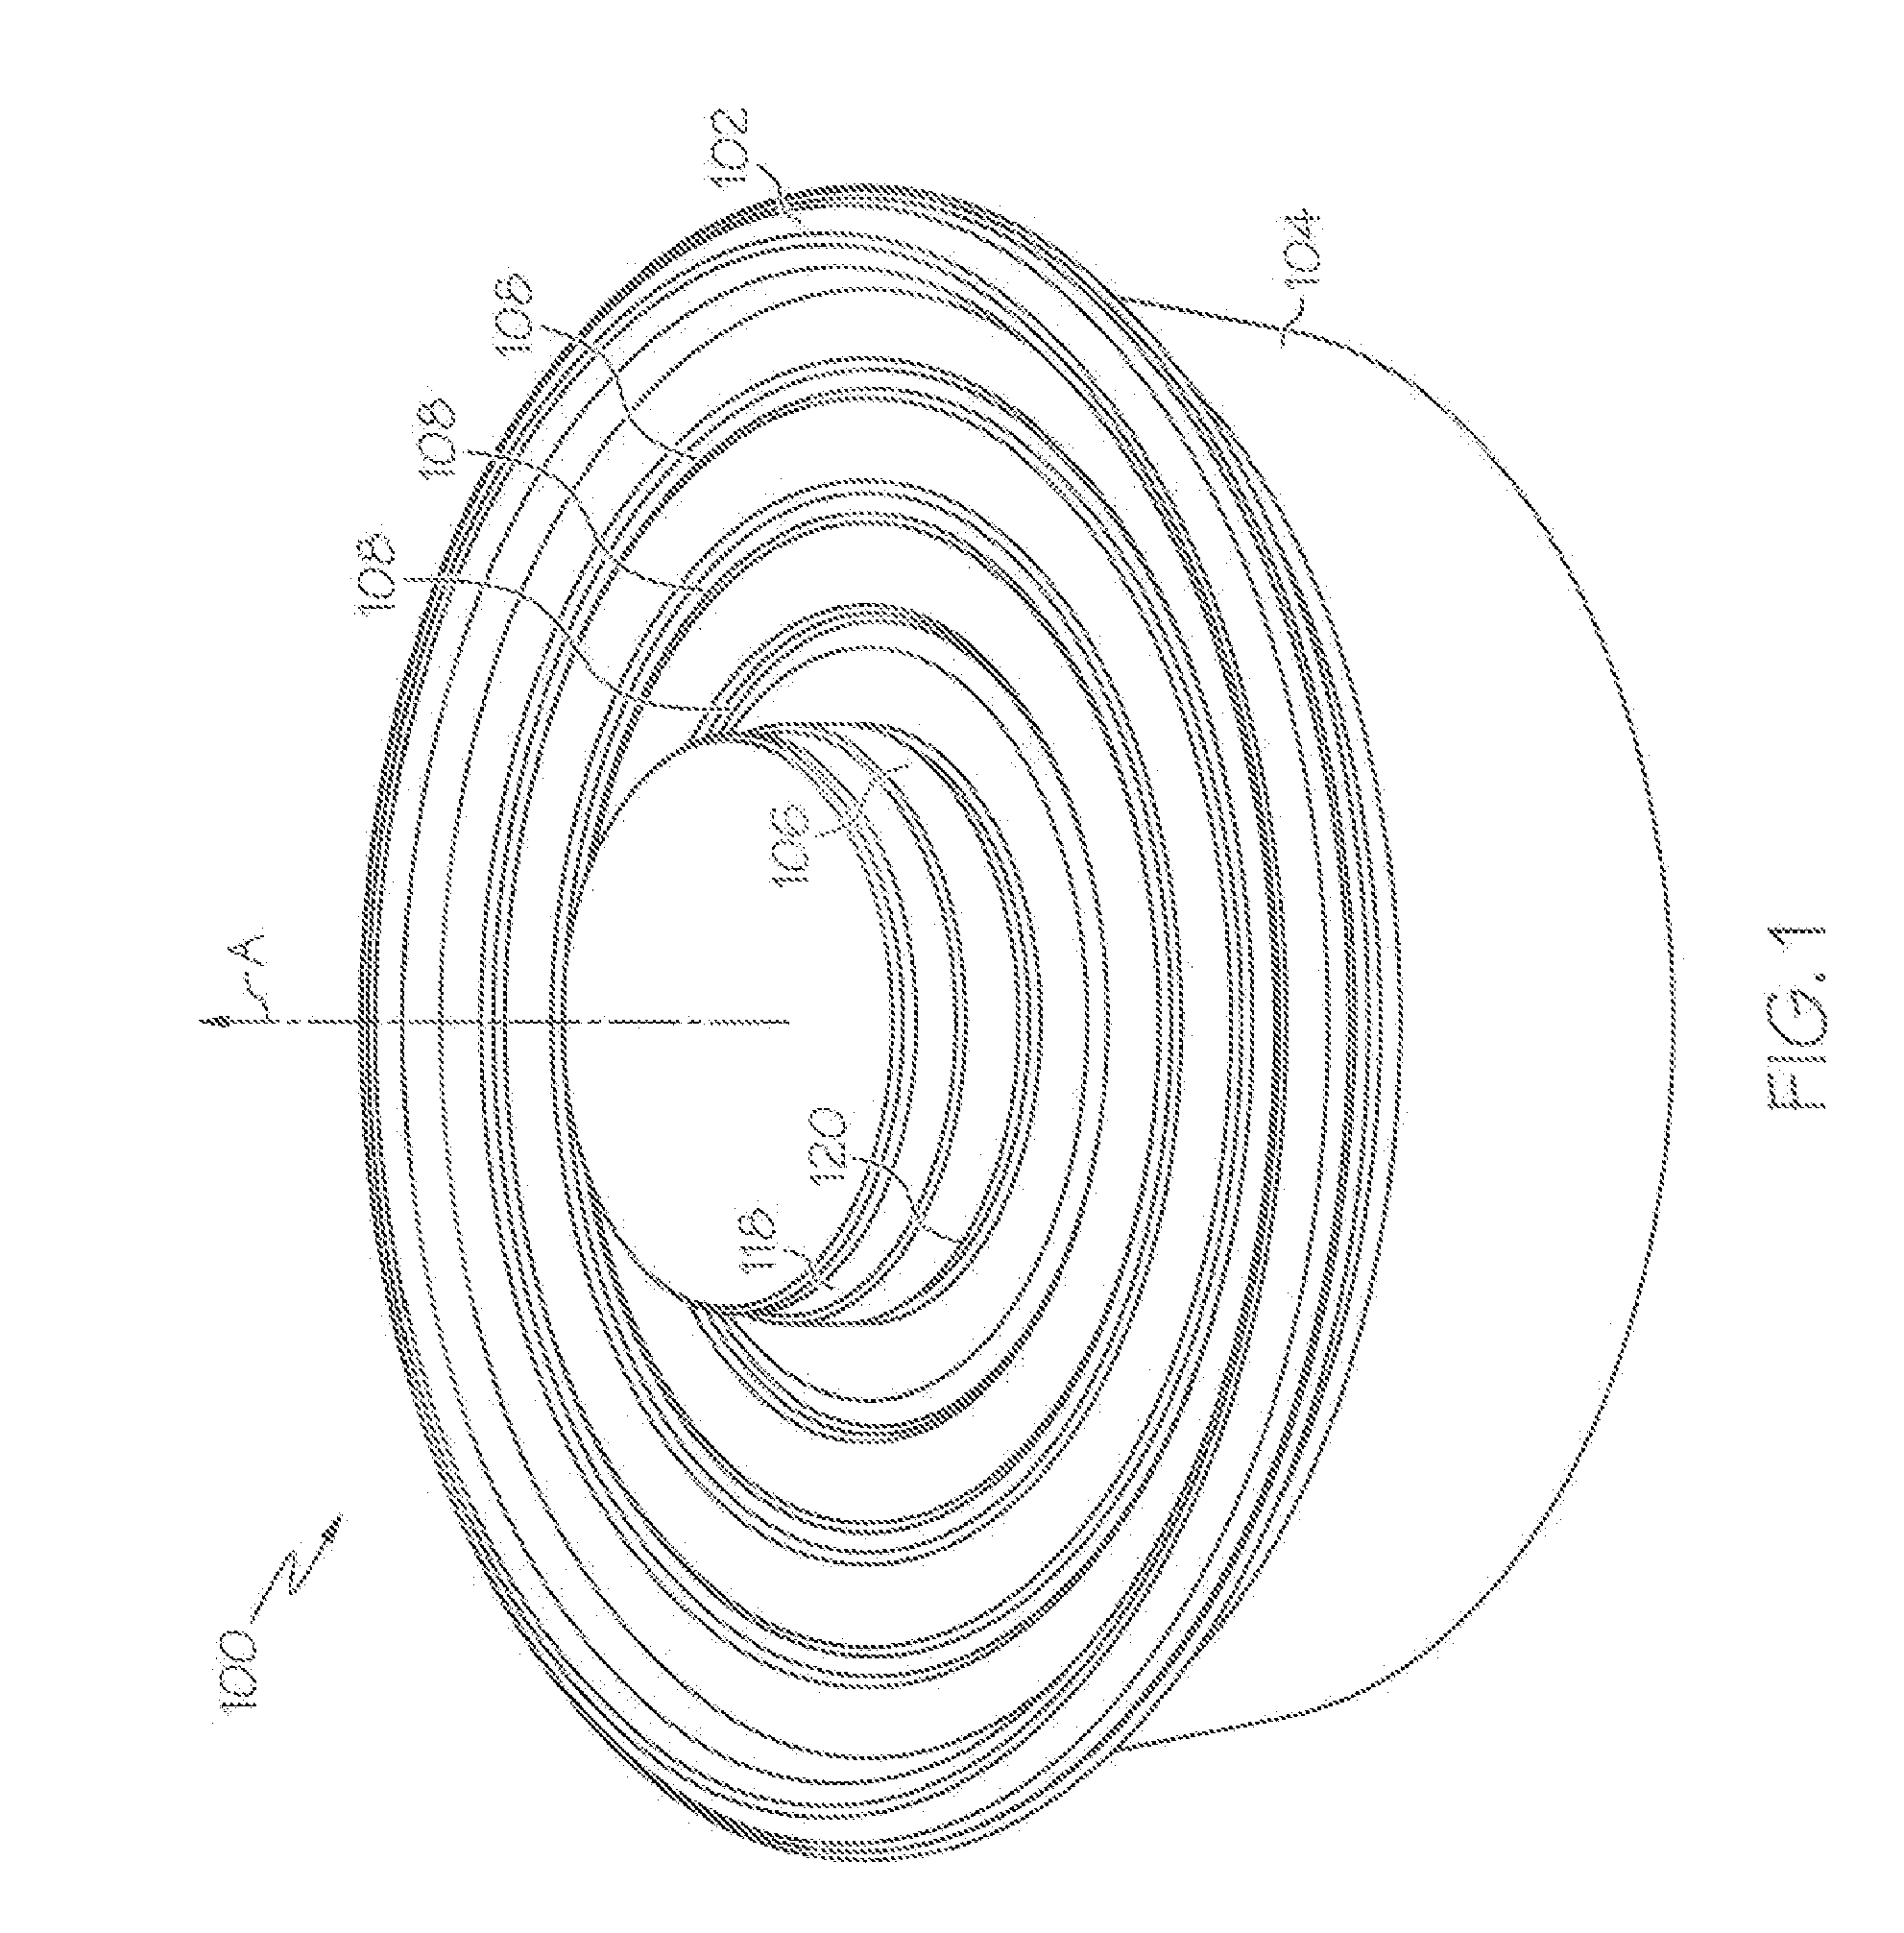 Storage device having an articulated cover fitting inner and outer containers